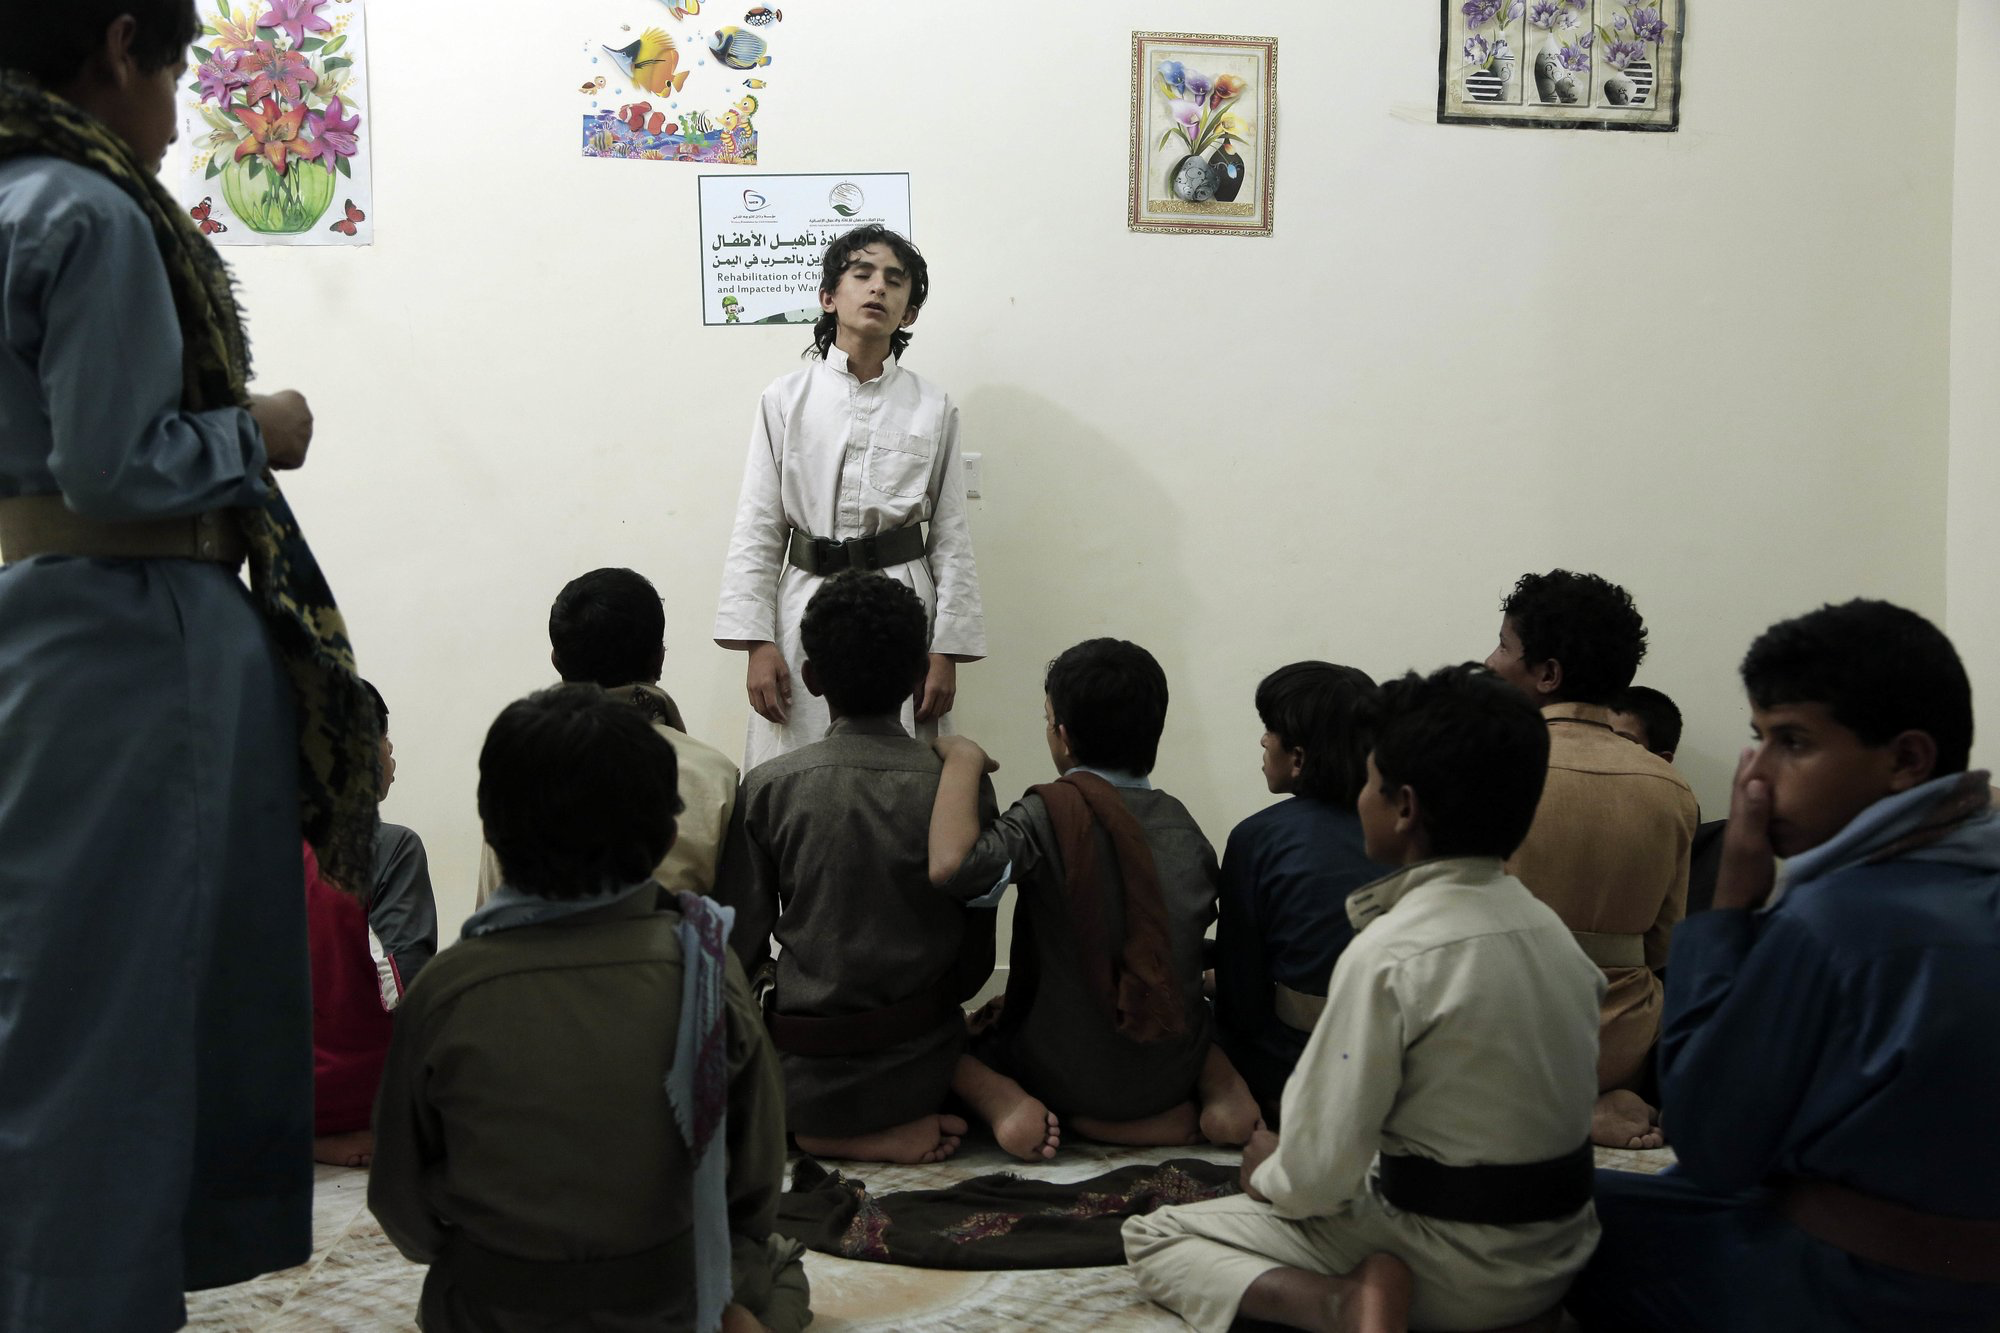 Boys recite poems during a session at a rehabilitation center for former child soldiers in Marib, Yemen, in this July 25, 2018, photo. The Houthi rebels have enlisted some 18,000 child fighters over the course of the 4-year-old civil war, according to one Houthi official. Their experiences in combat, including seeing bodies of the dead and charging into battle as missiles explode, have left many of the boys traumatized. Image by Nariman El-Mofty / AP News. Yemen, 2018.